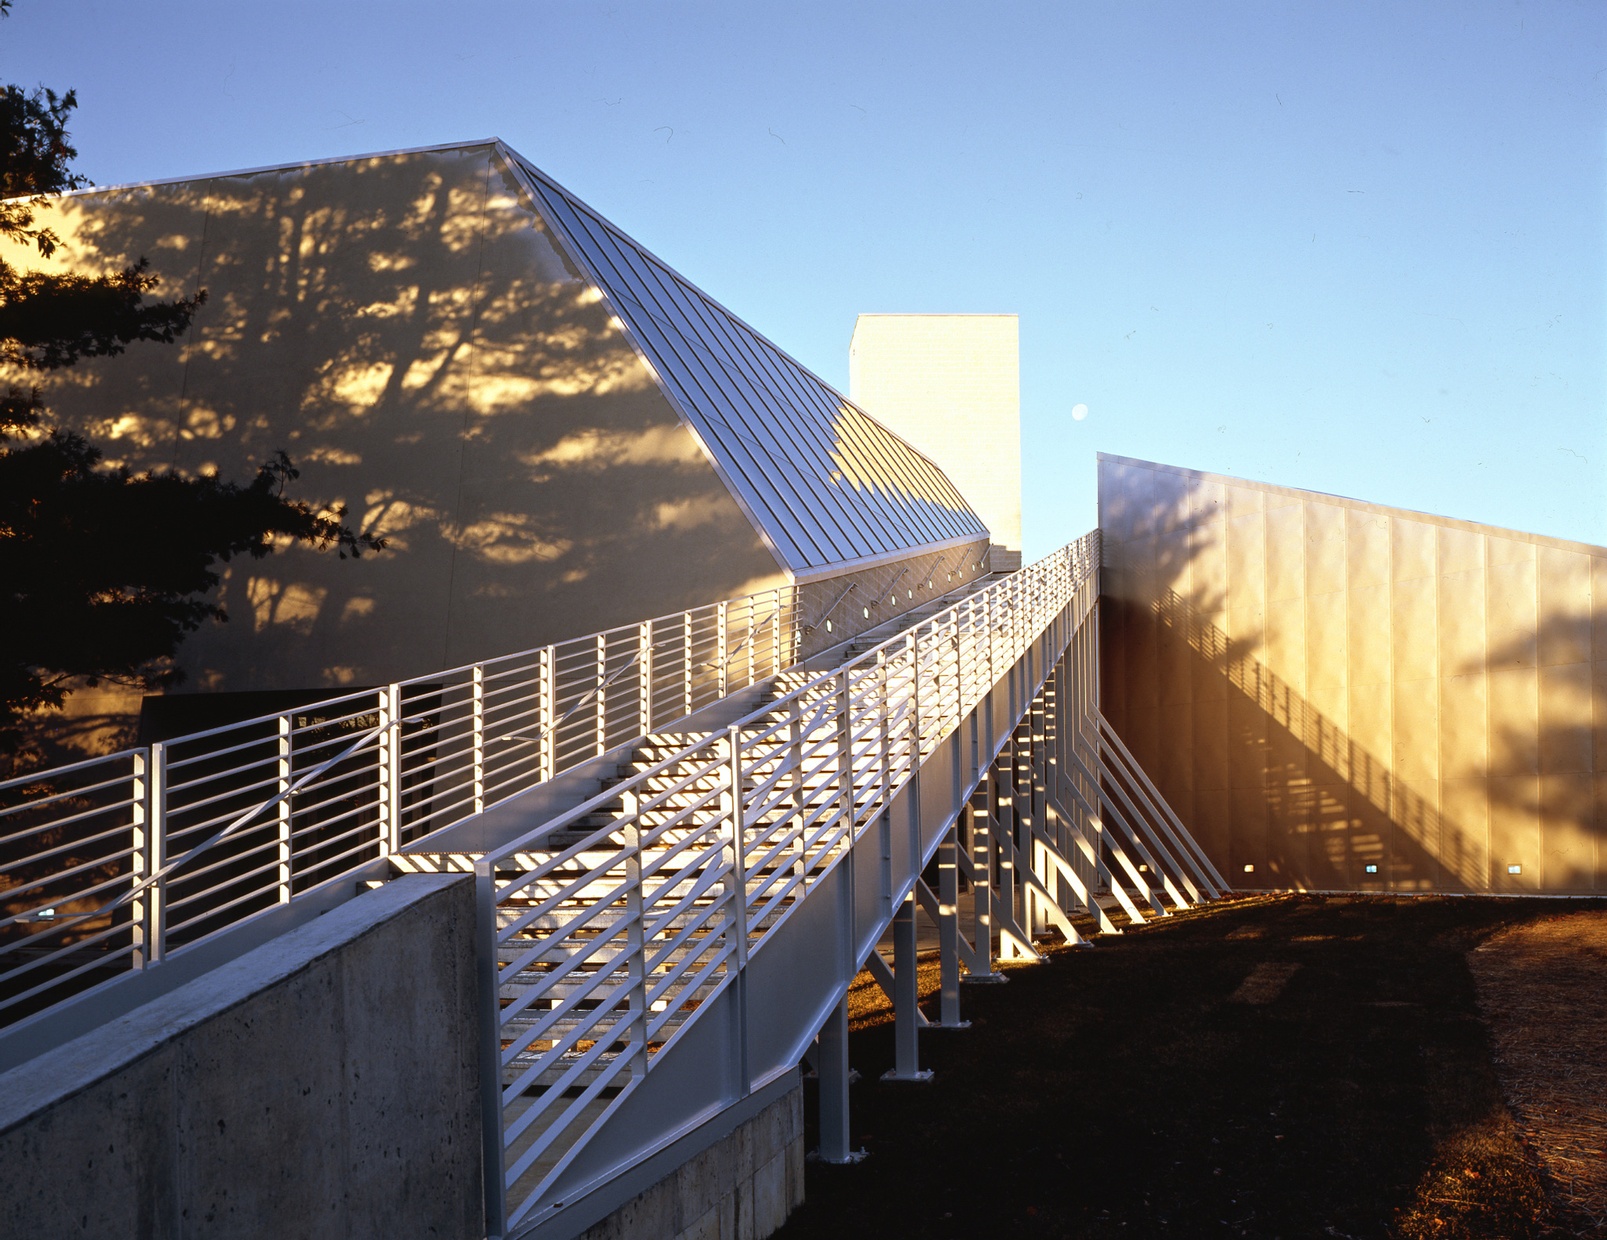 White and gray stairs lead up to the roof of a white and gray, angular building shadowed by trees.